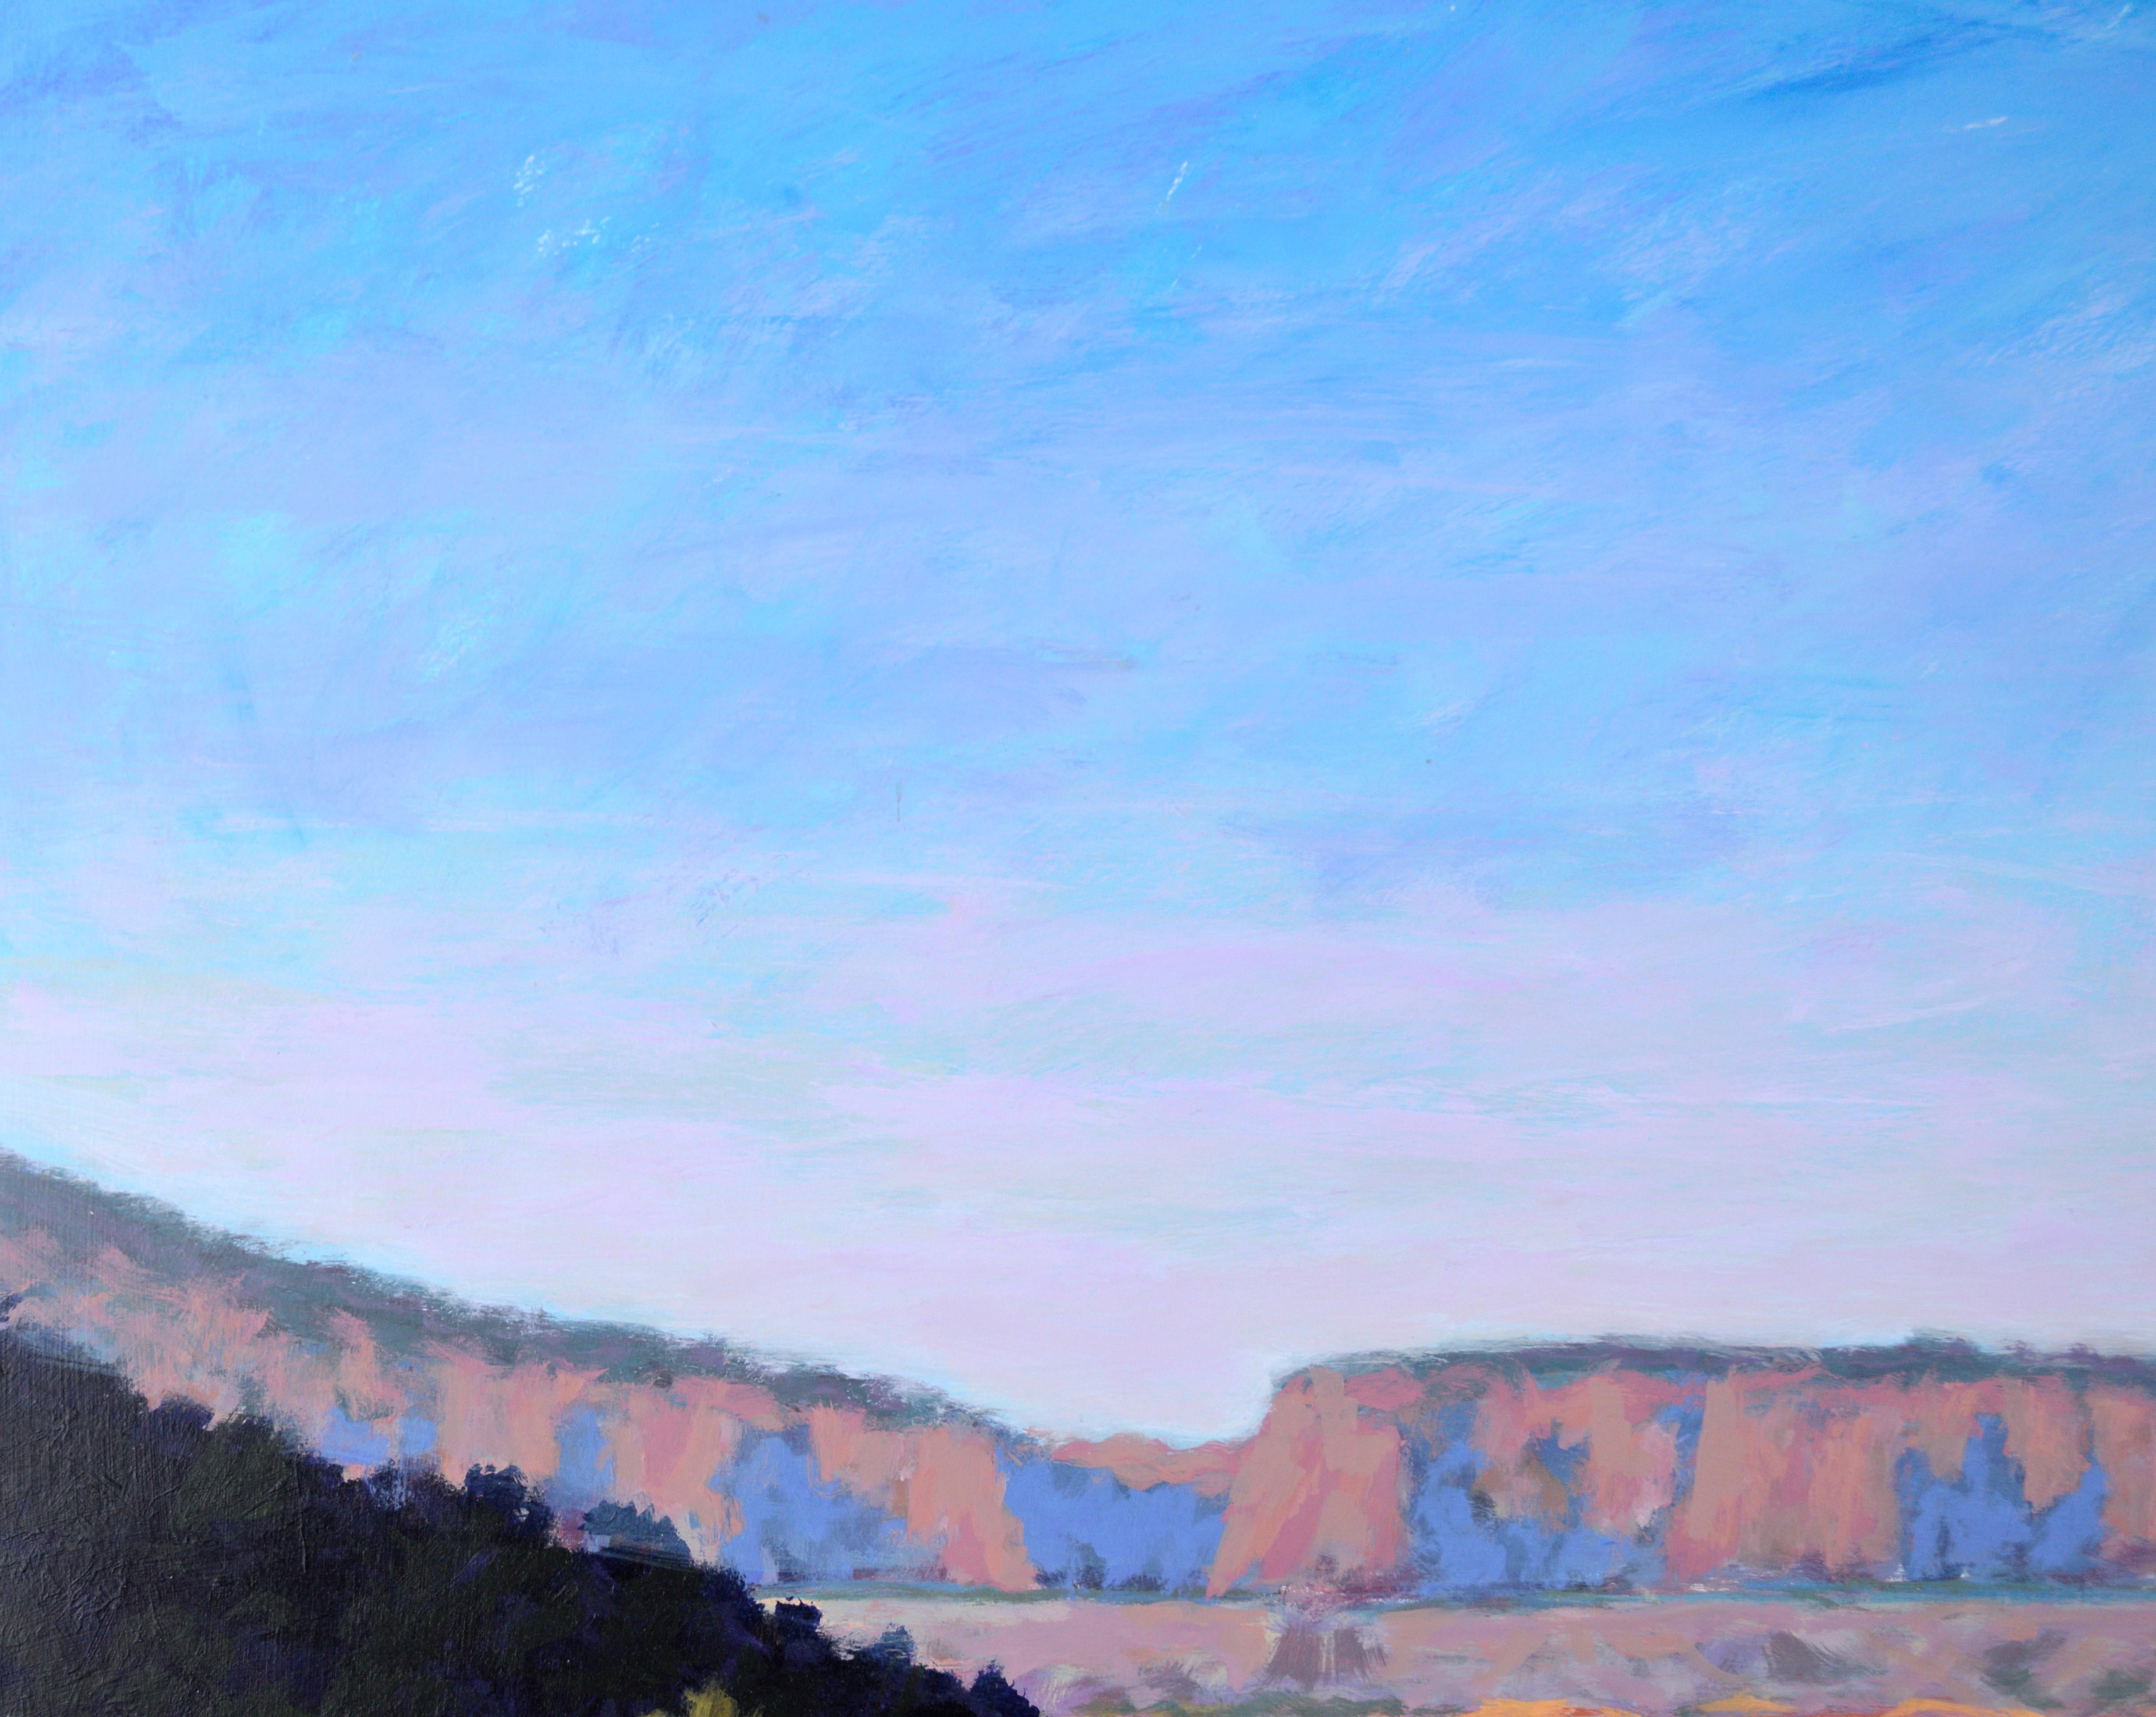 Red Cliffs in the Desert - Western Plein Aire Landscape in Acrylic on Board - American Impressionist Painting by Nick White